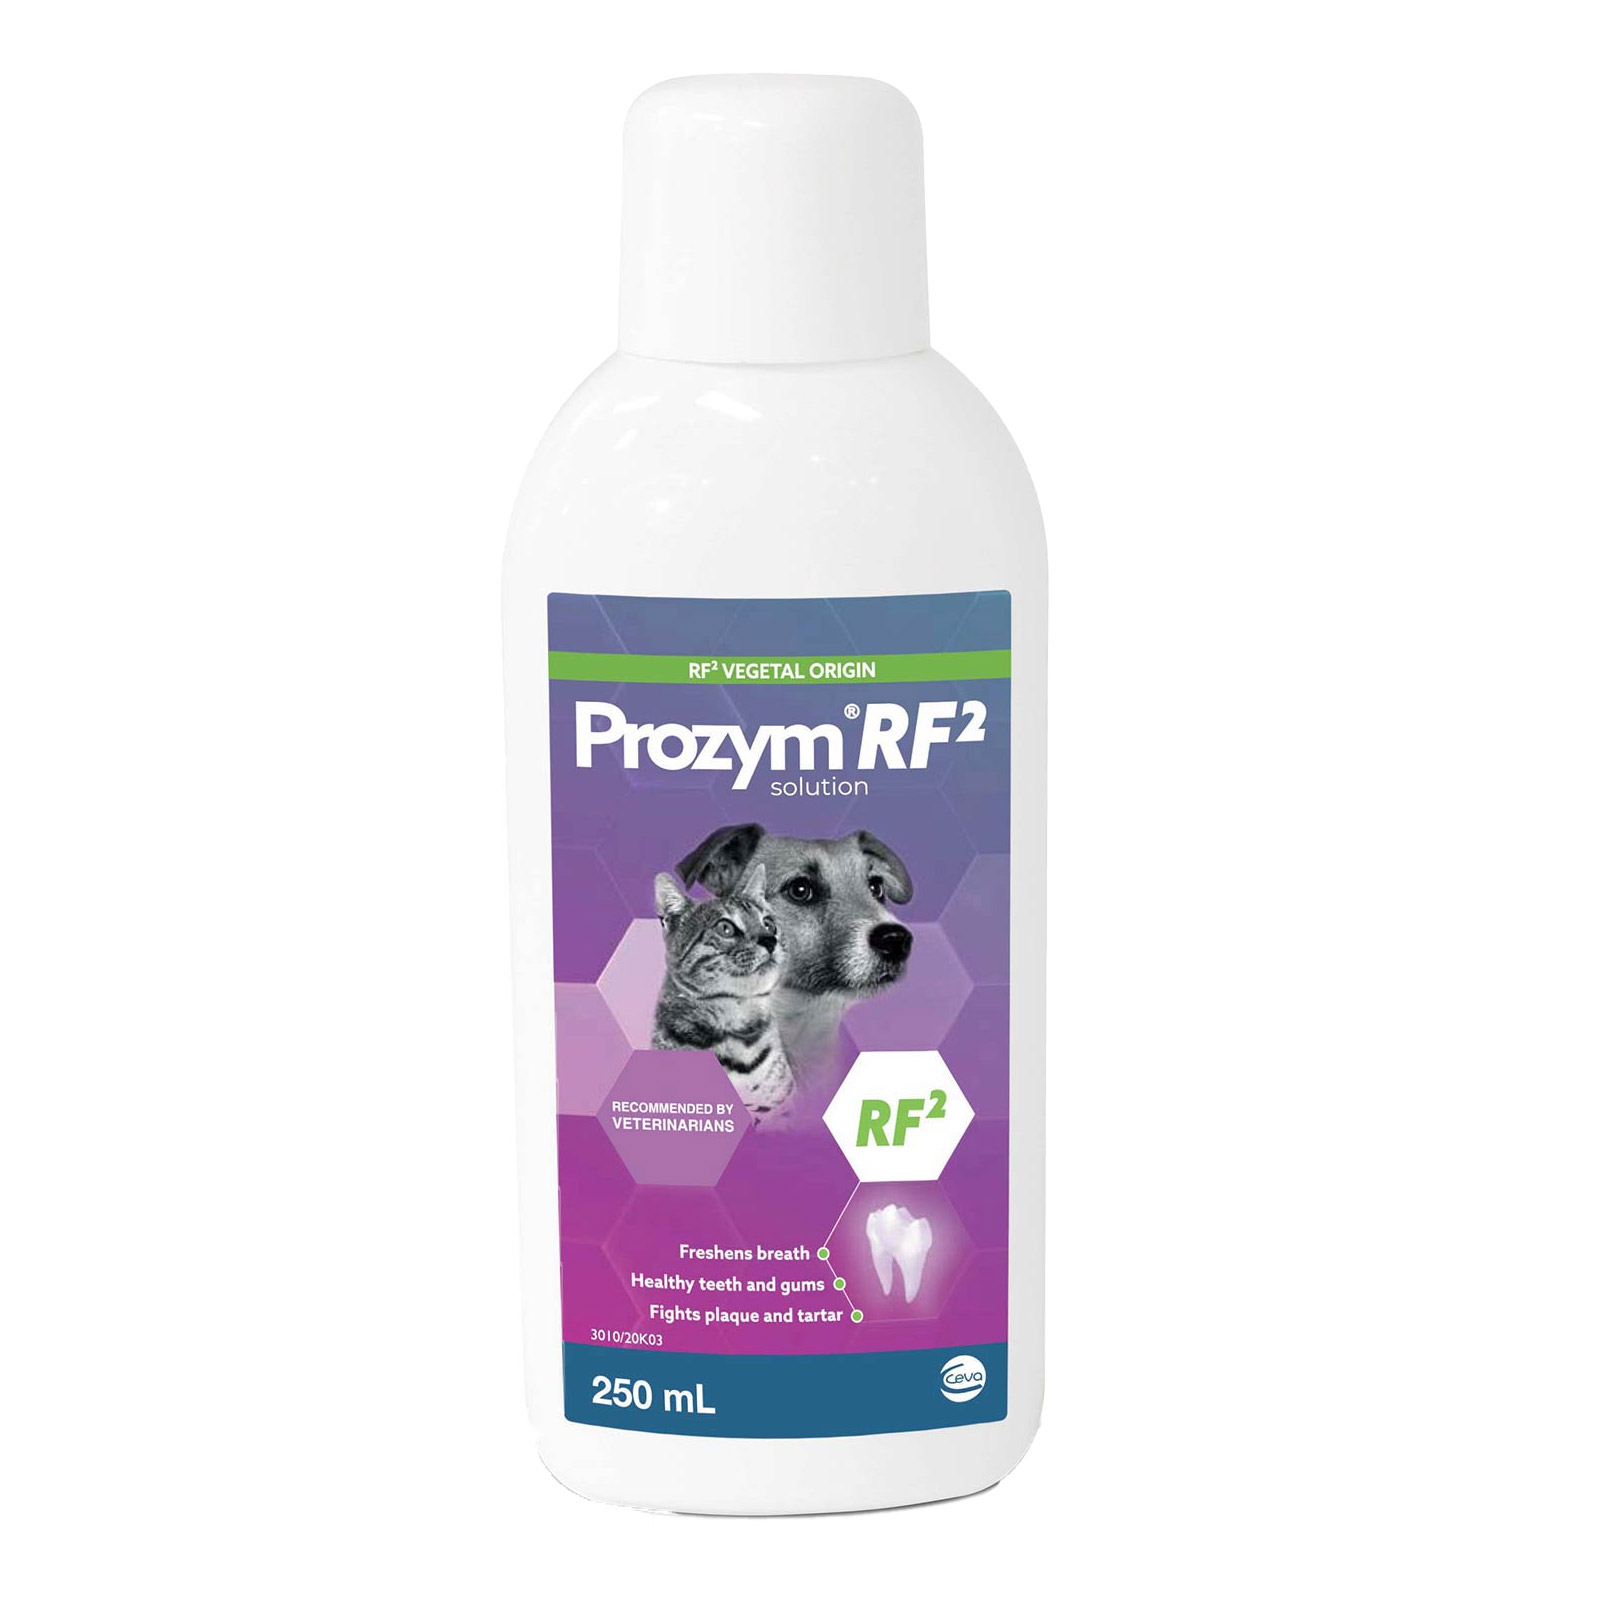 Prozym Rf2 Dental Solution For Cats And Dogs for Dogs